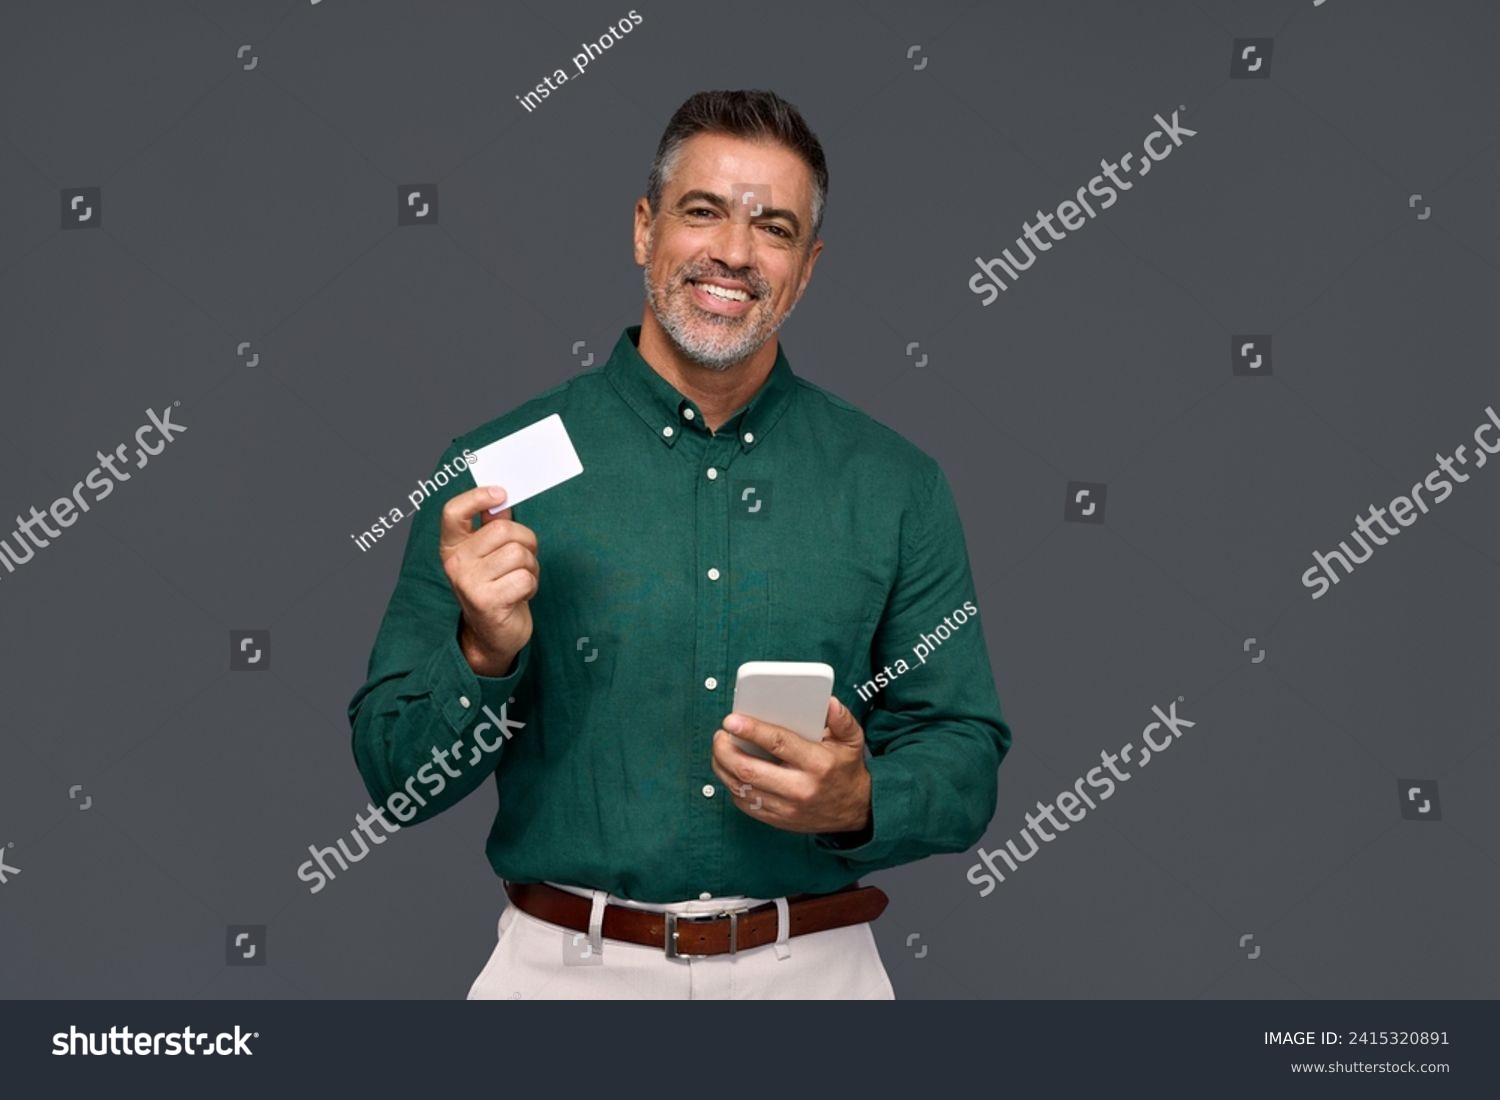 Happy middle aged business man, smiling mature businessman holding mobile phone and credit debit card mockup using banking finance app making online purchase on smartphone isolated on gray background. #2415320891